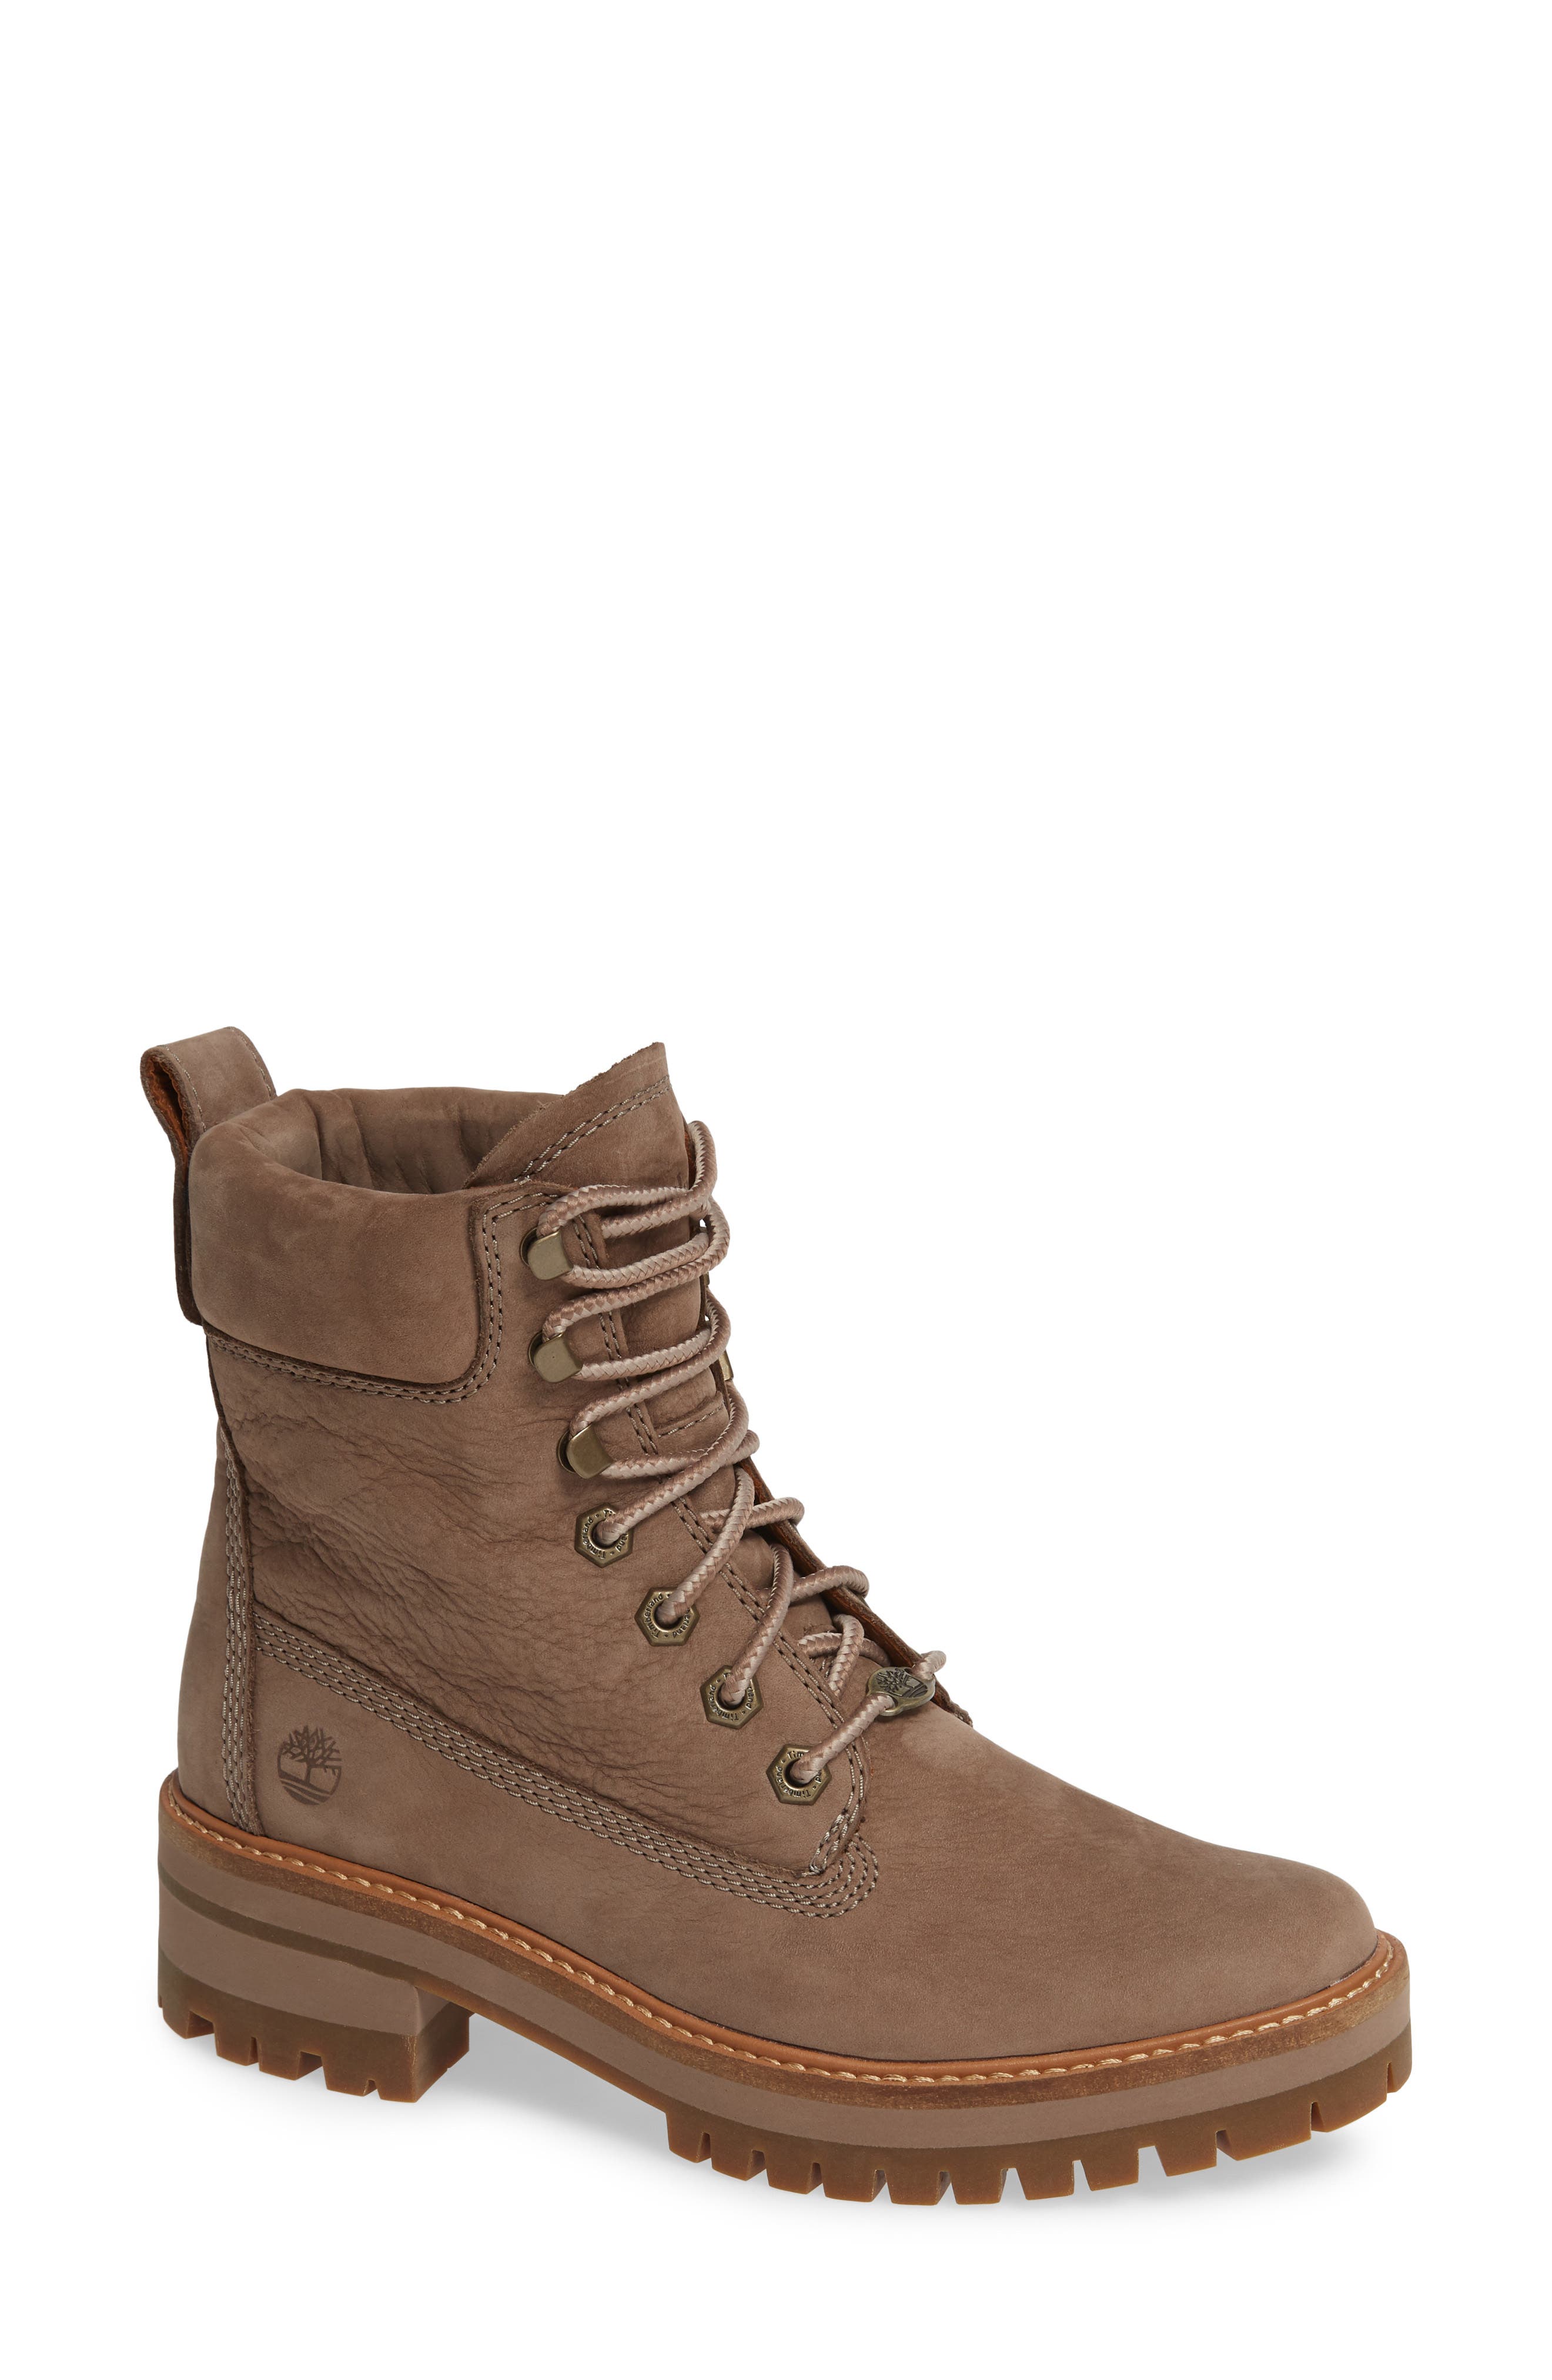 nordstrom womens hiking boots